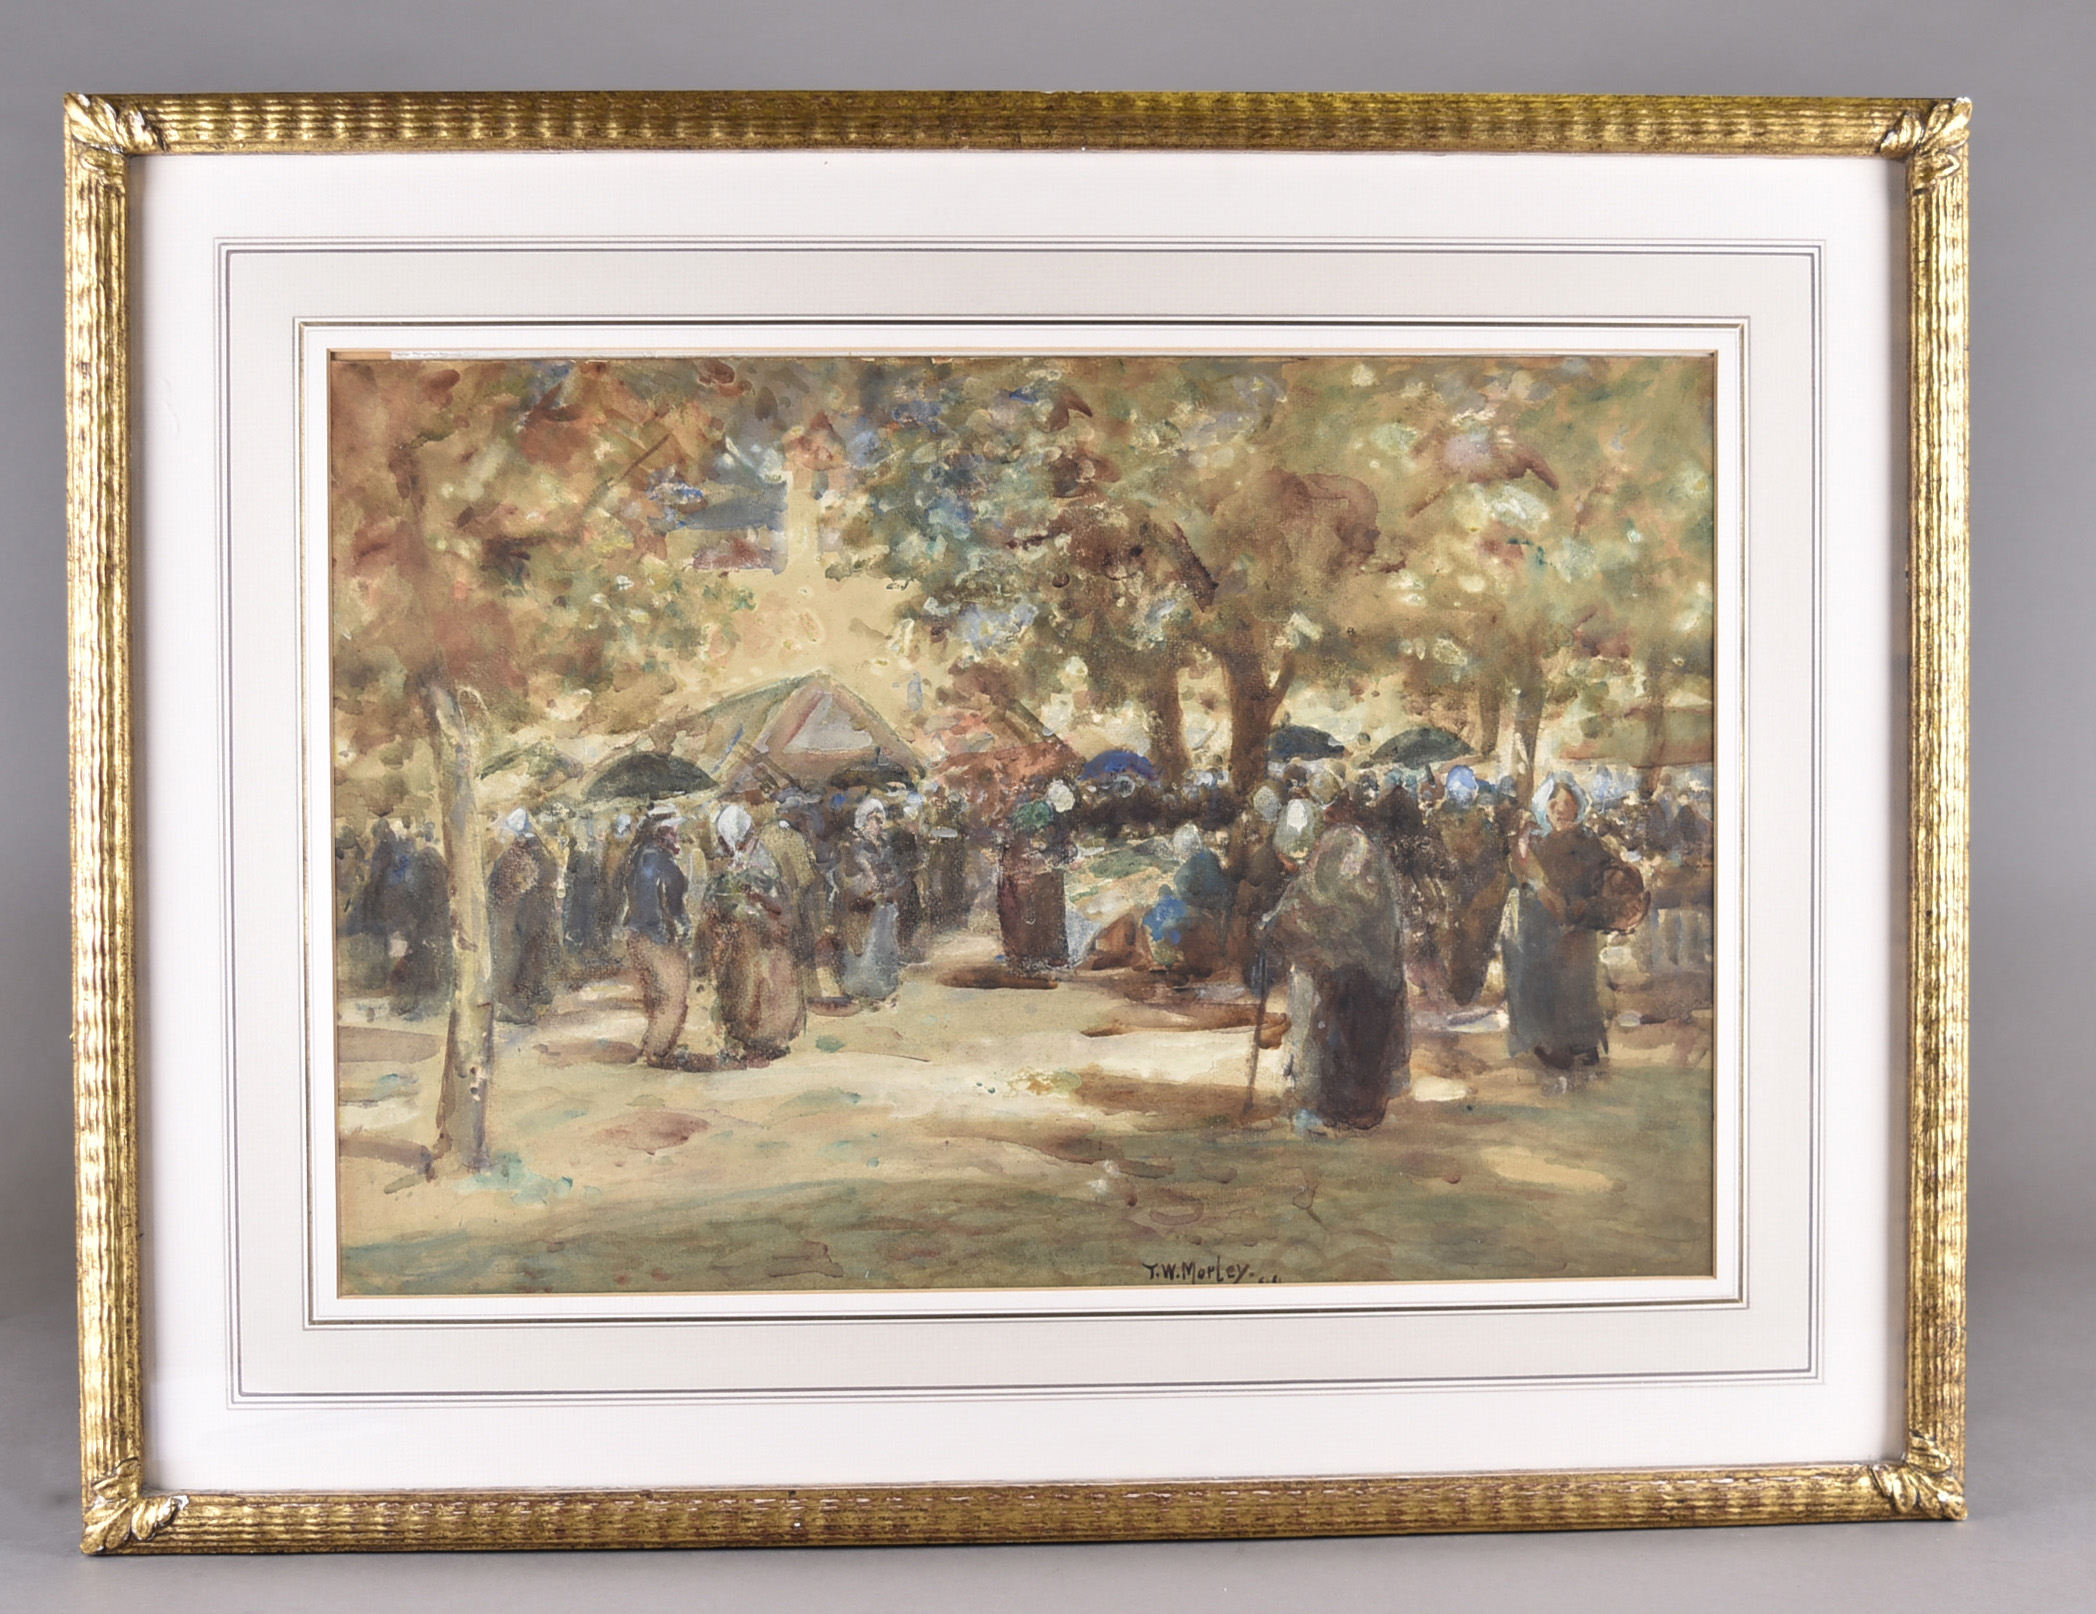 Thomas William Morley (1859-1925) watercolour on paper, French Market Scene', signed 'T.W.Morley' ( - Image 2 of 2